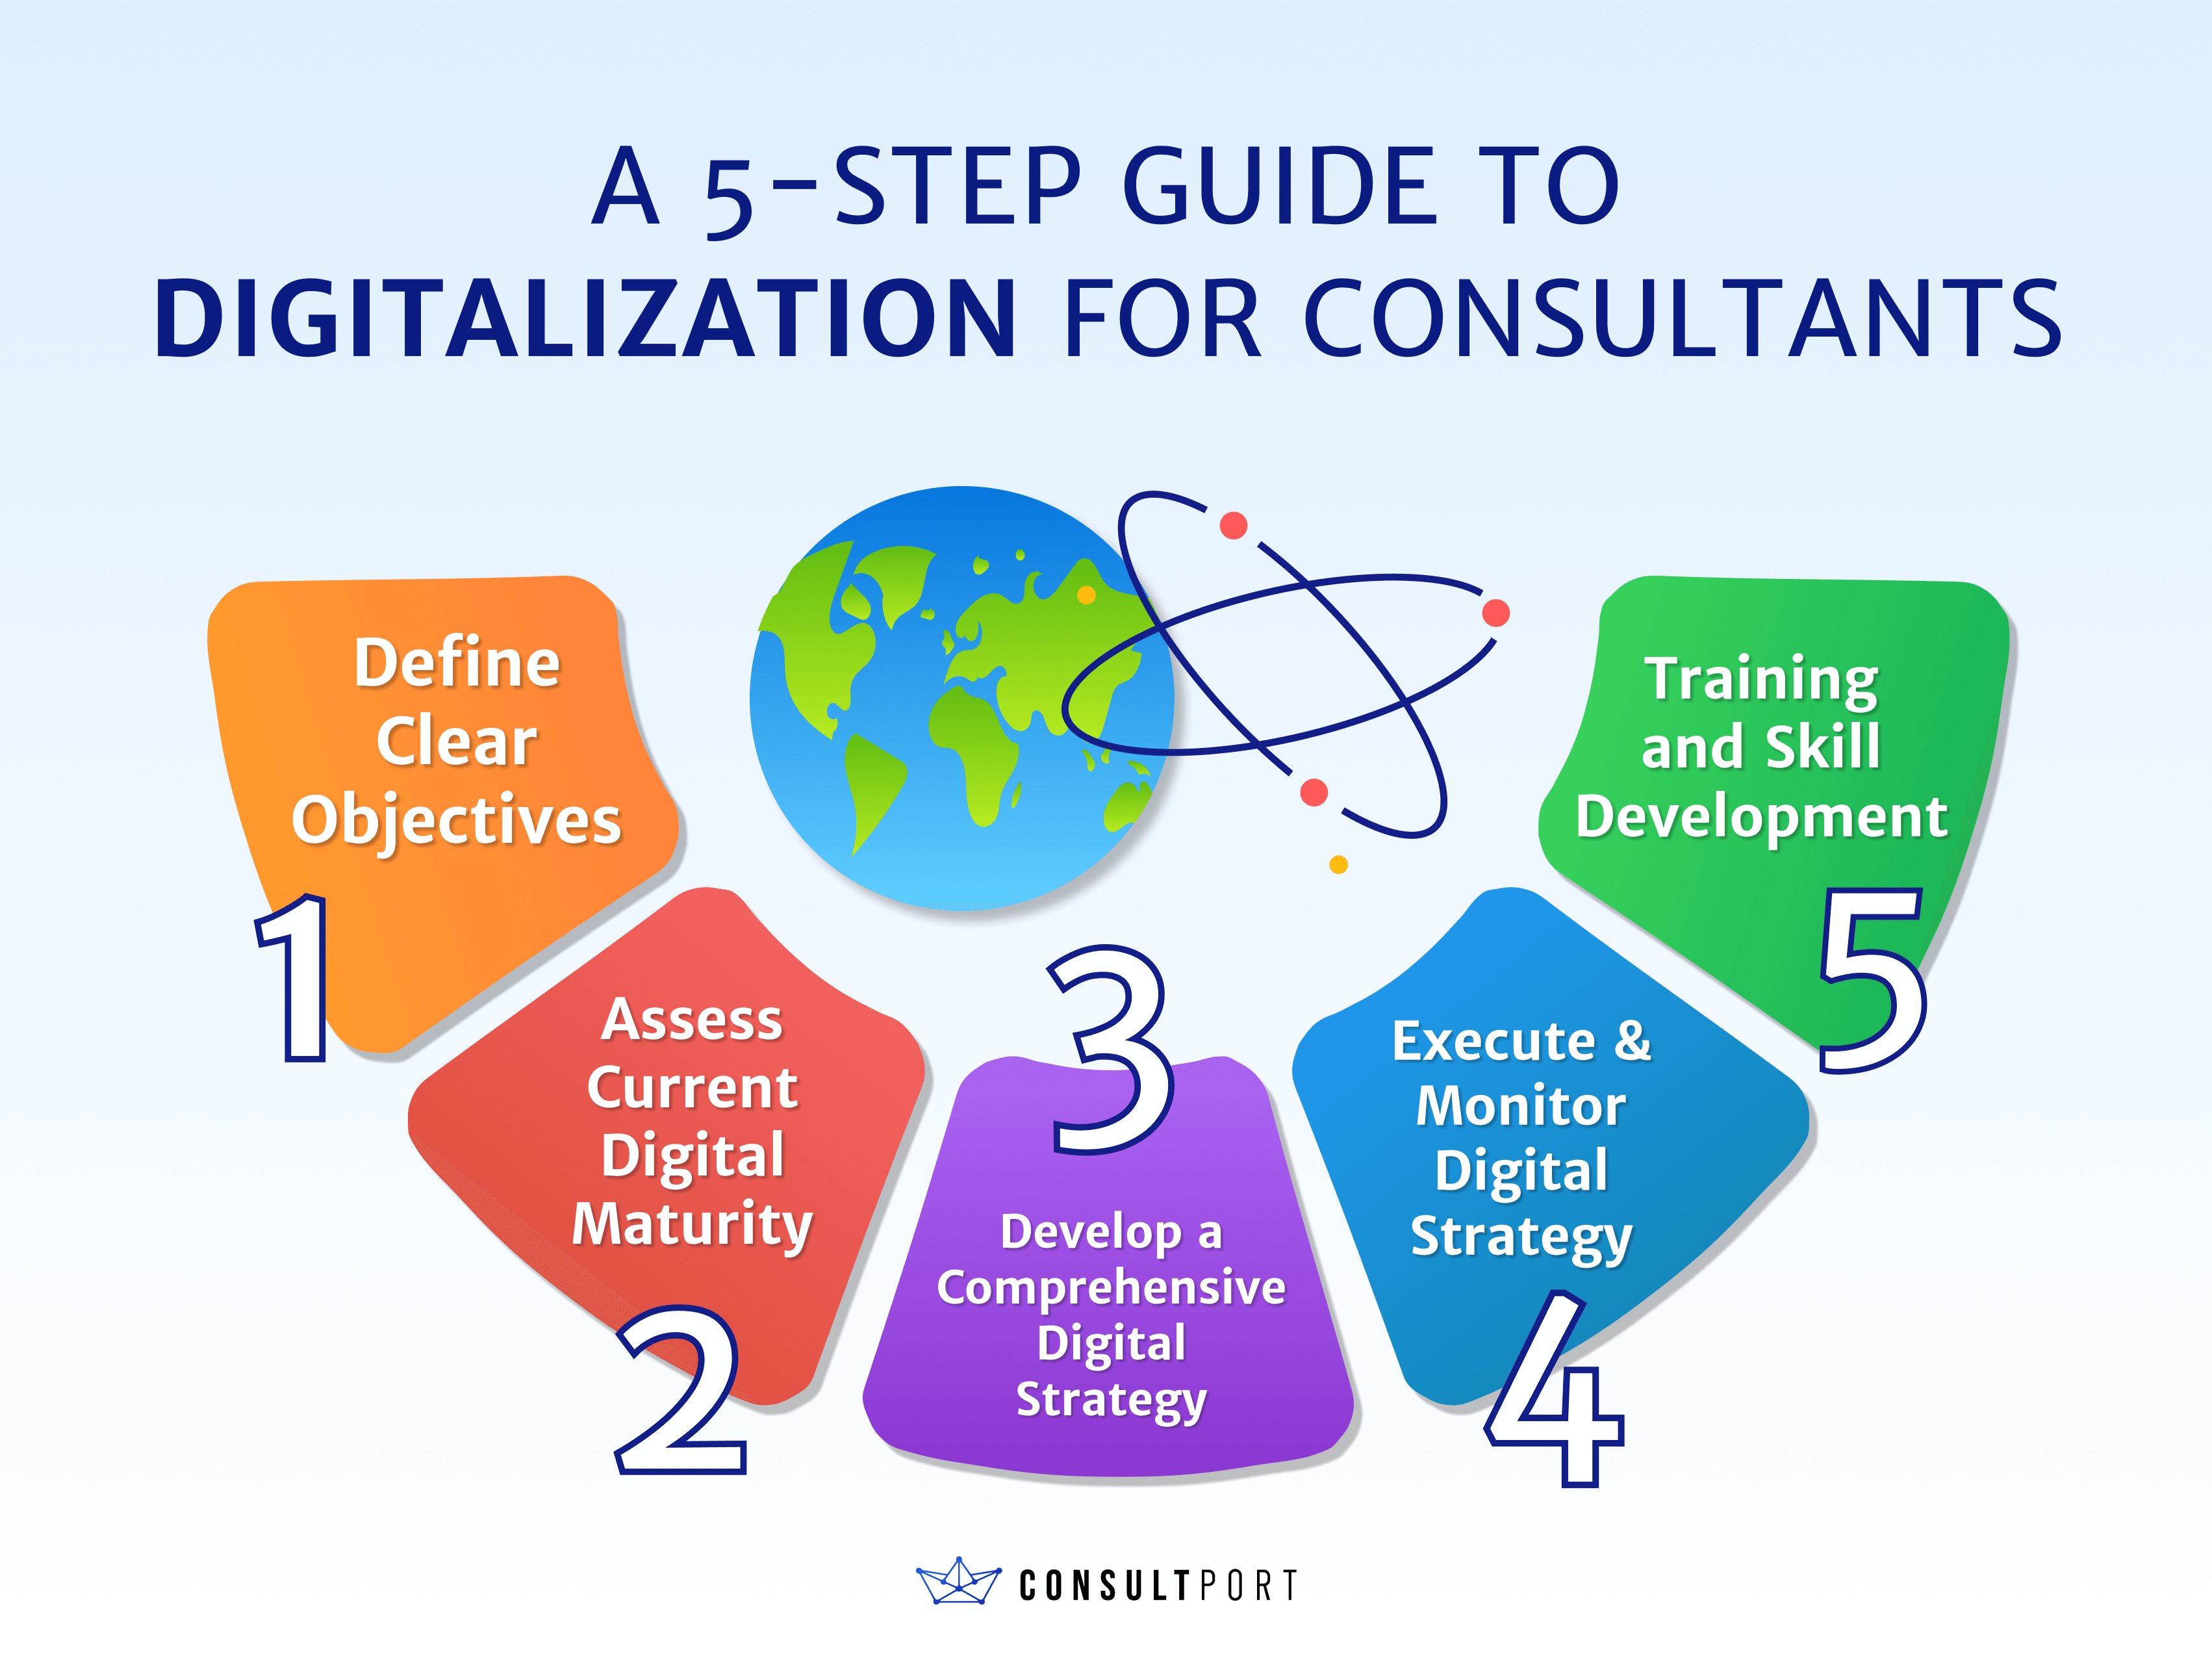 A 5-STEP GUIDE TO DIGITALIZATION FOR CONSULTANTS